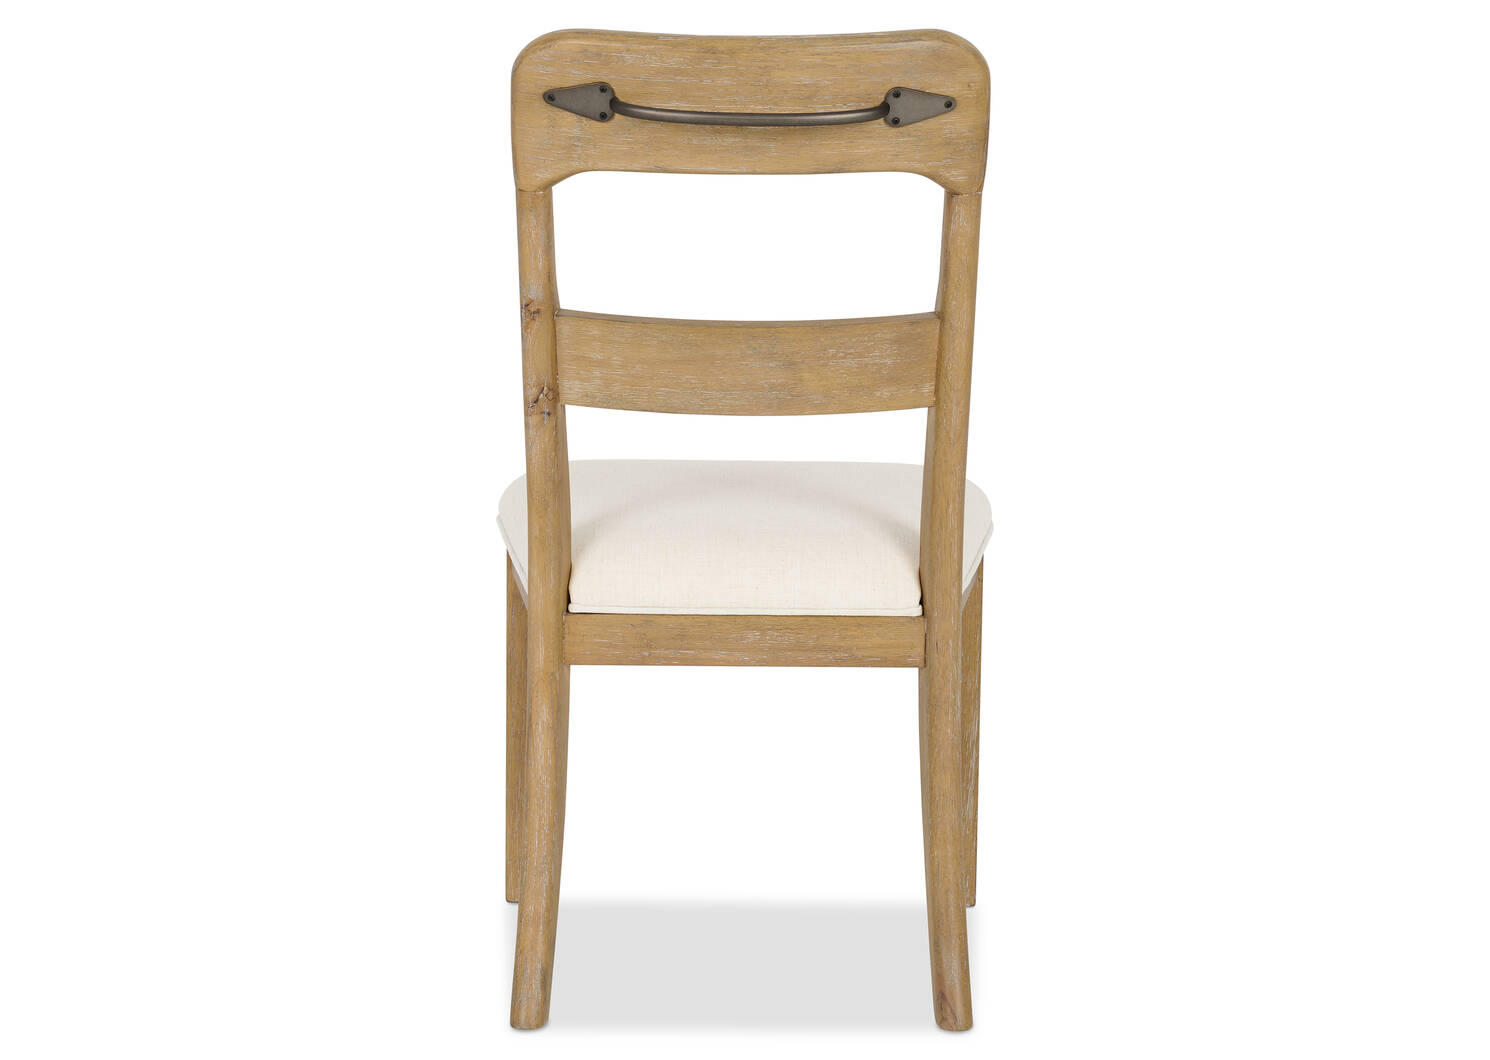 Pinehurst Dining Chair -Claire Fawn